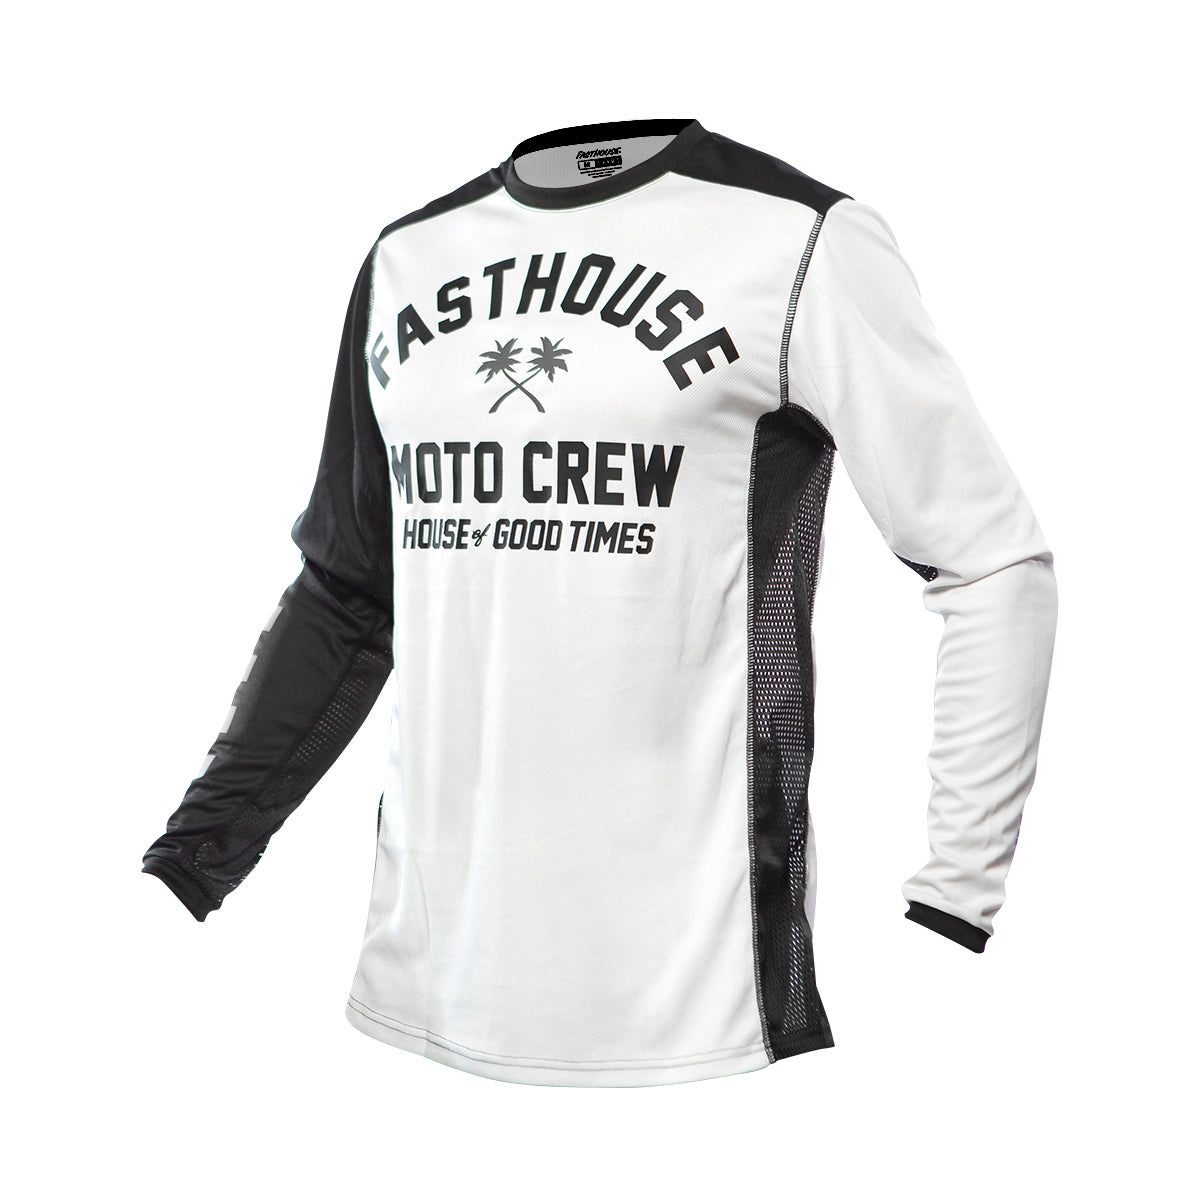 Grindhouse Haven Youth Jersey - White/Black